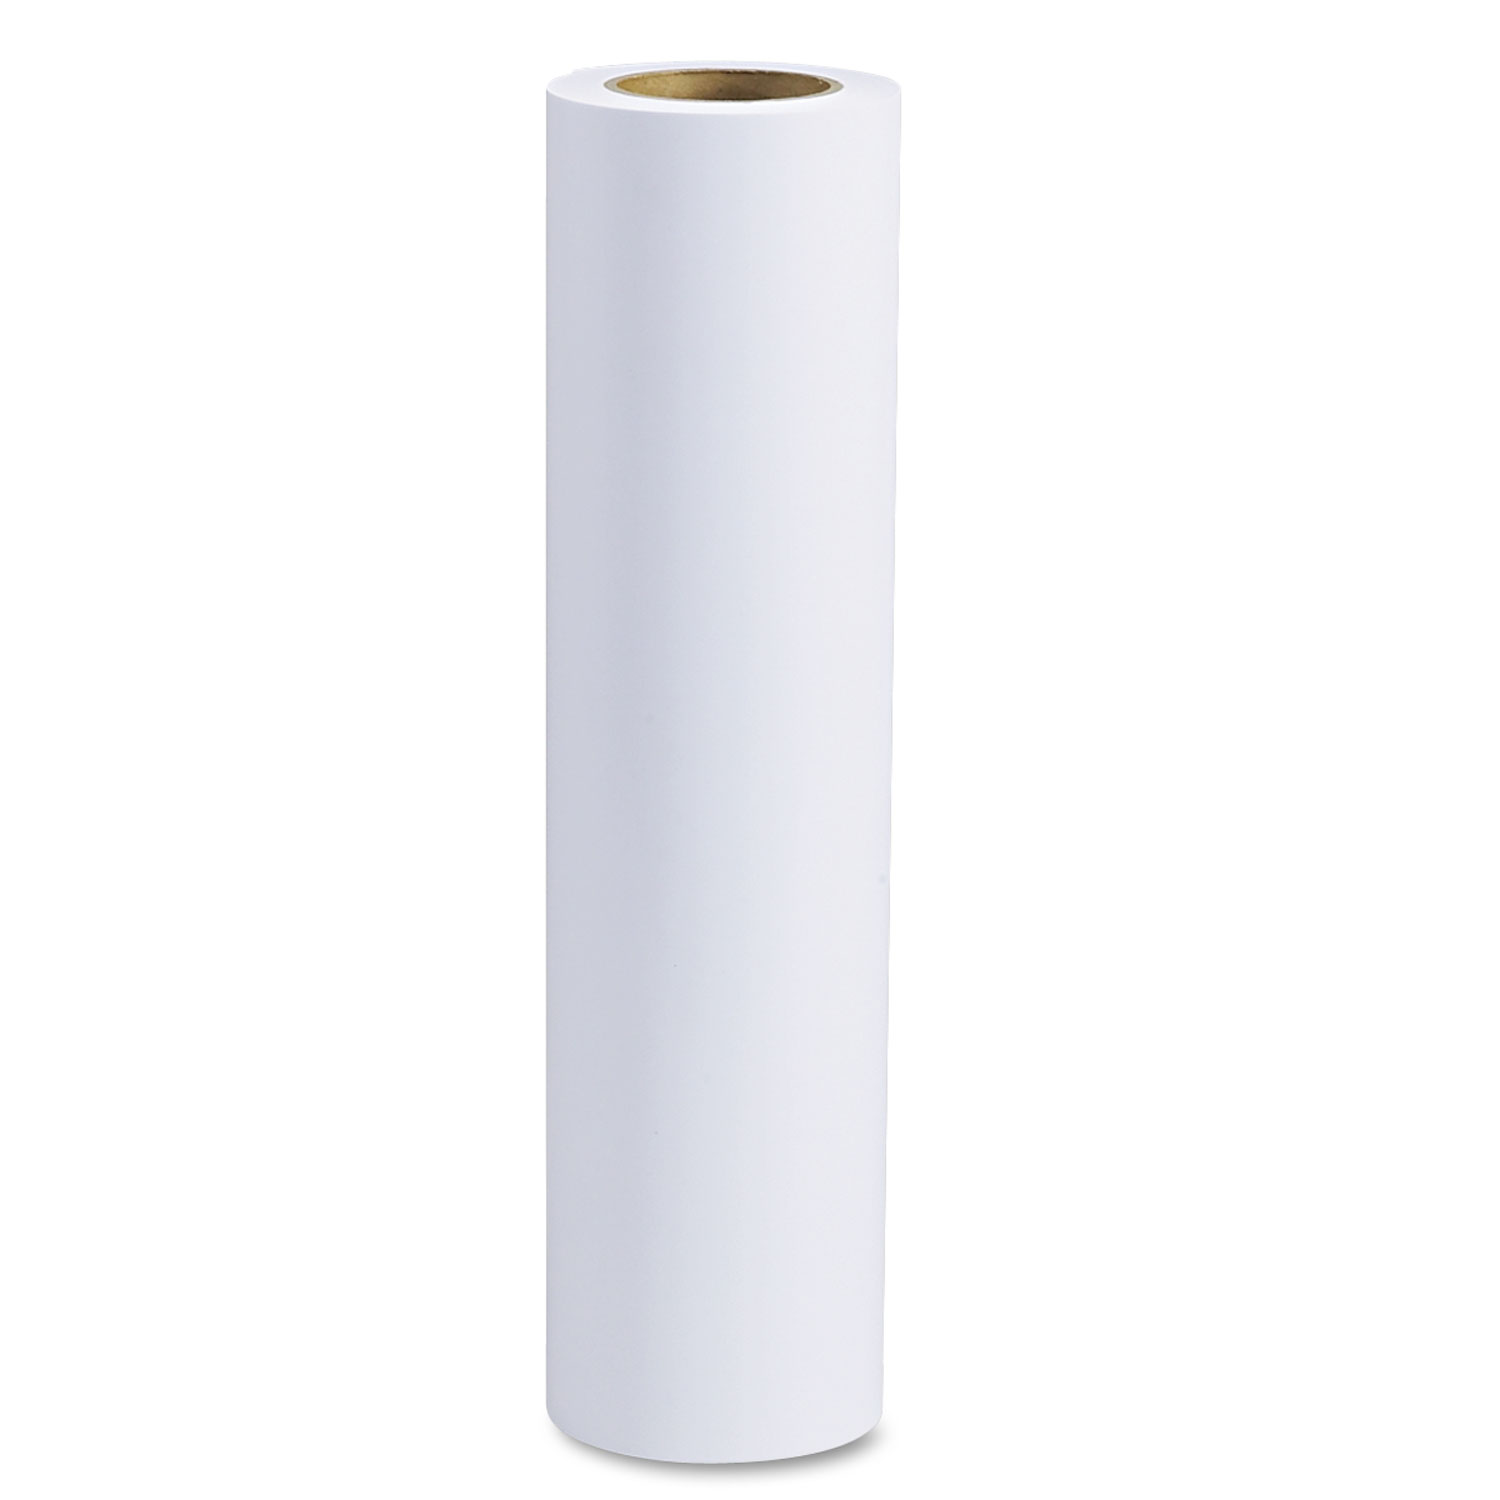 Papers & Film for Inkjet Printers, 13 x 32 ft, White, Roll